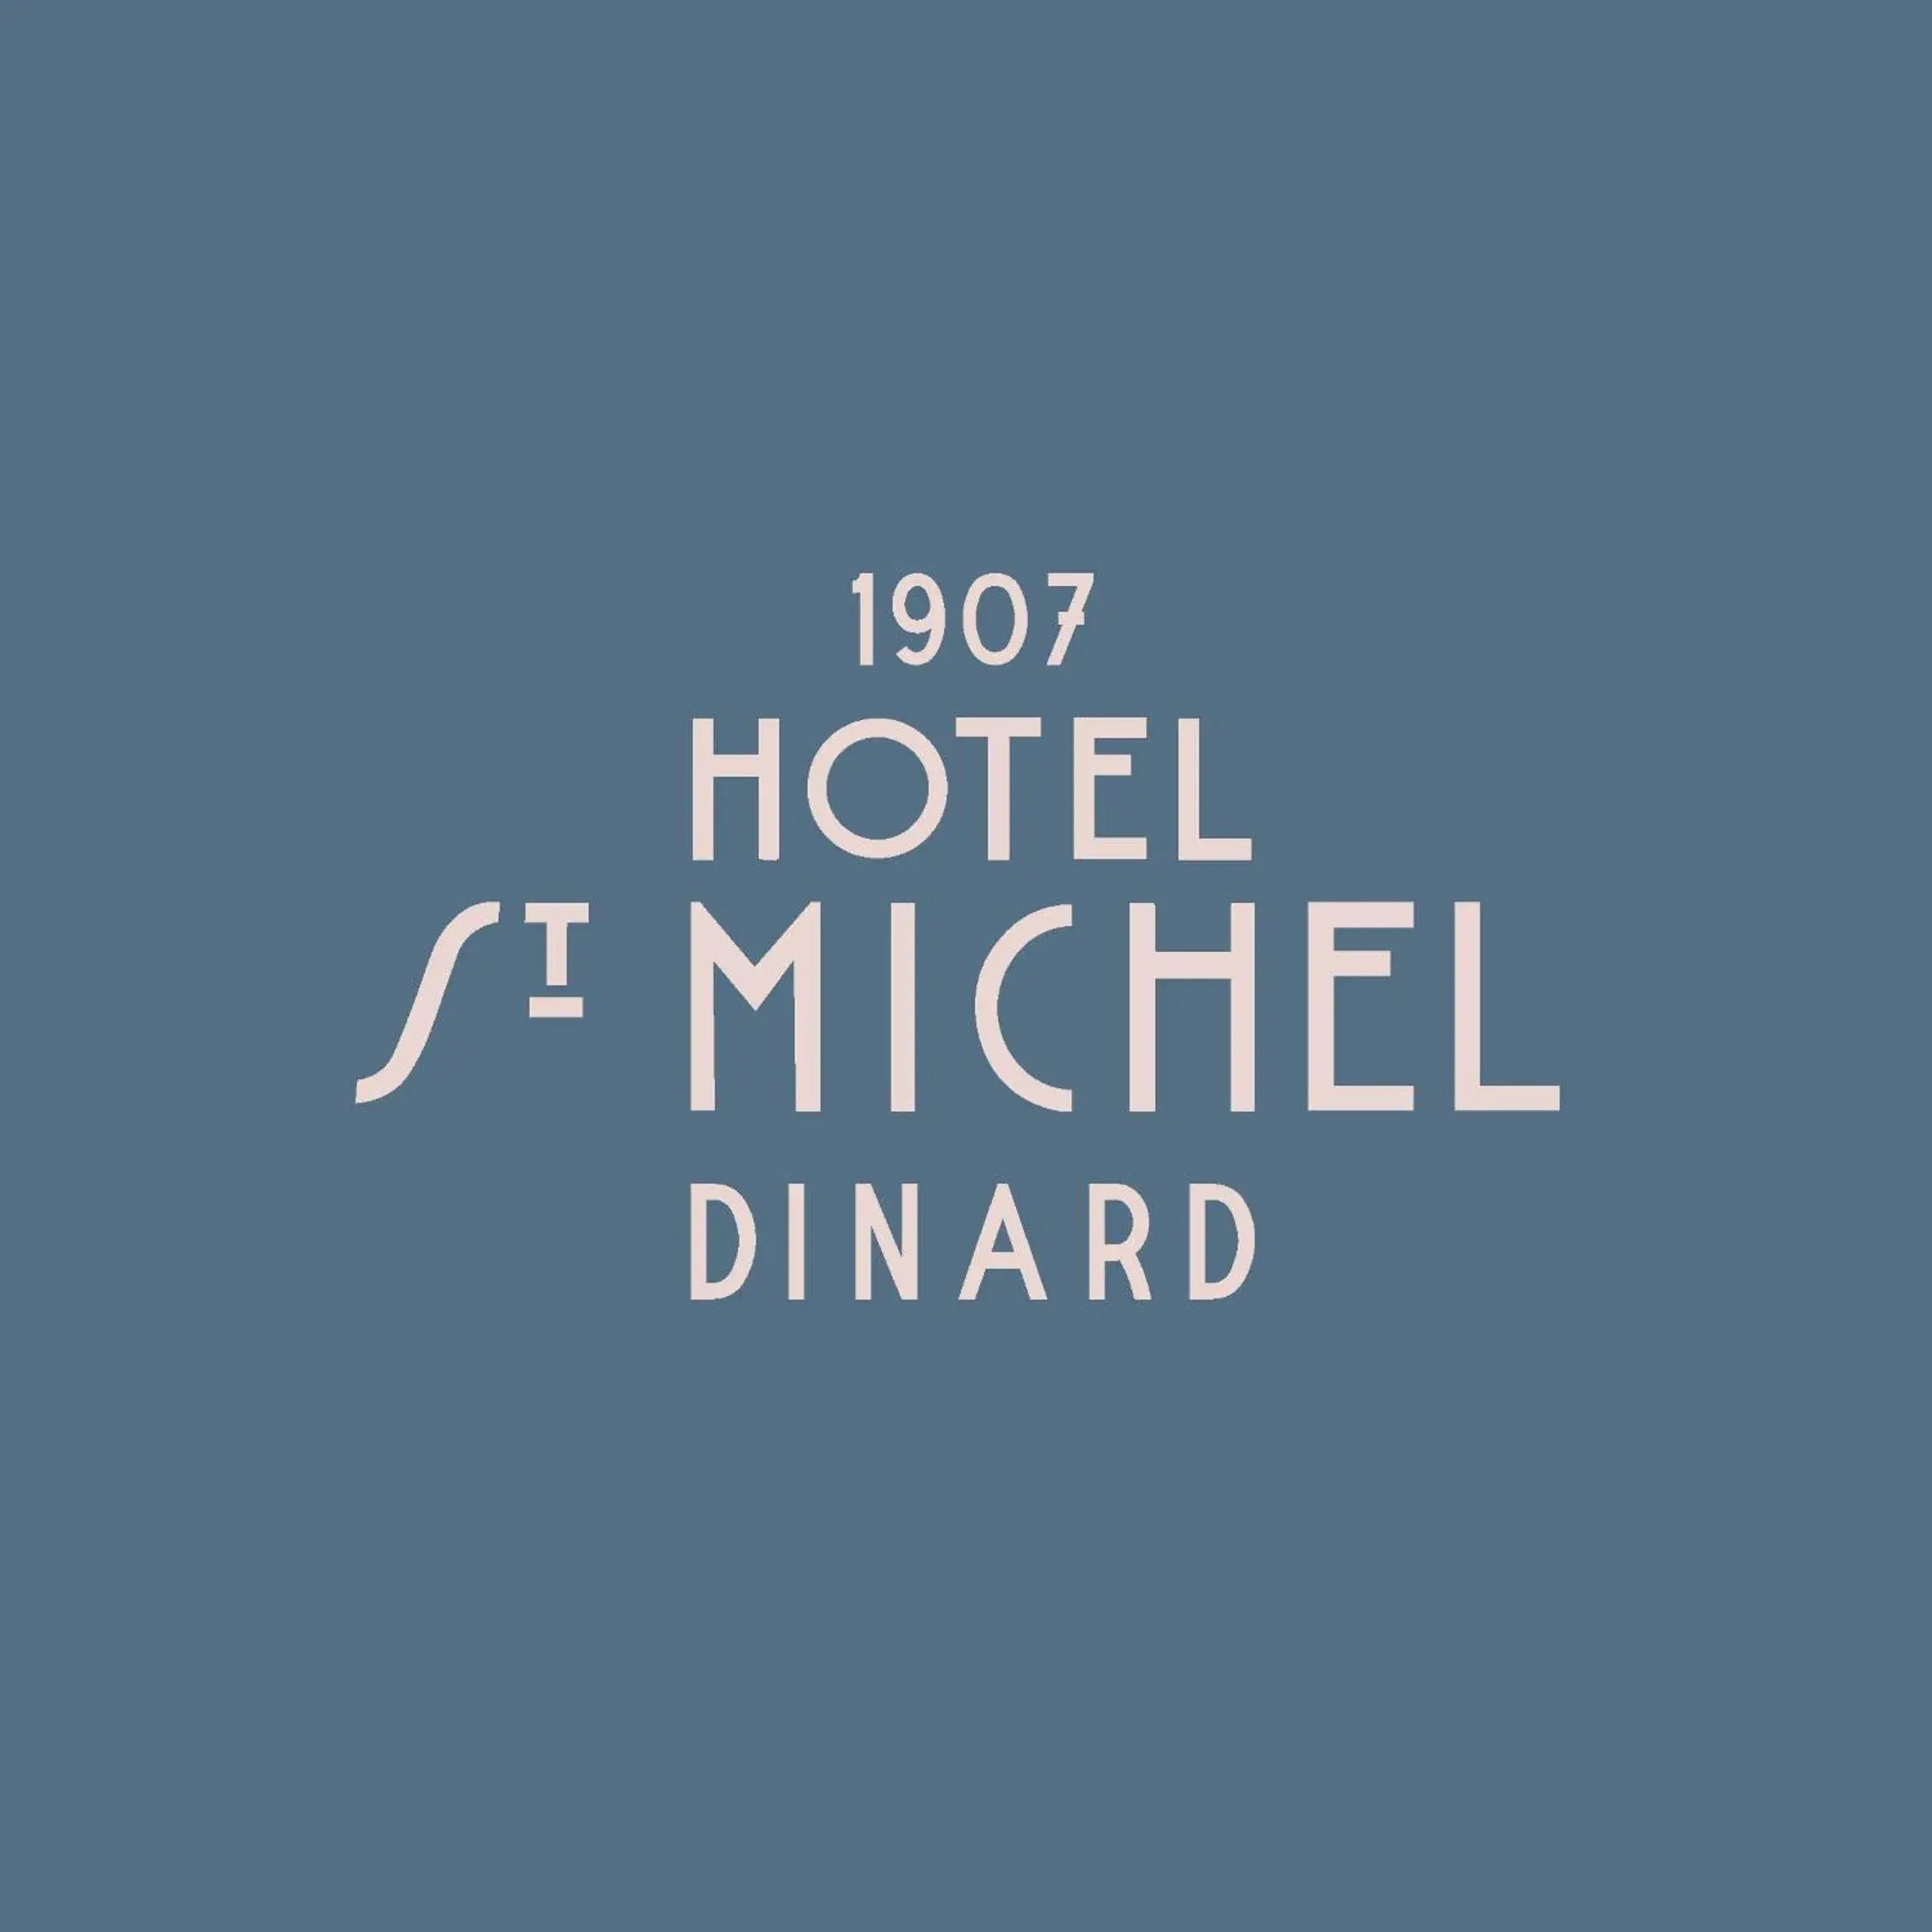 Property logo or sign in Hotel Saint-Michel